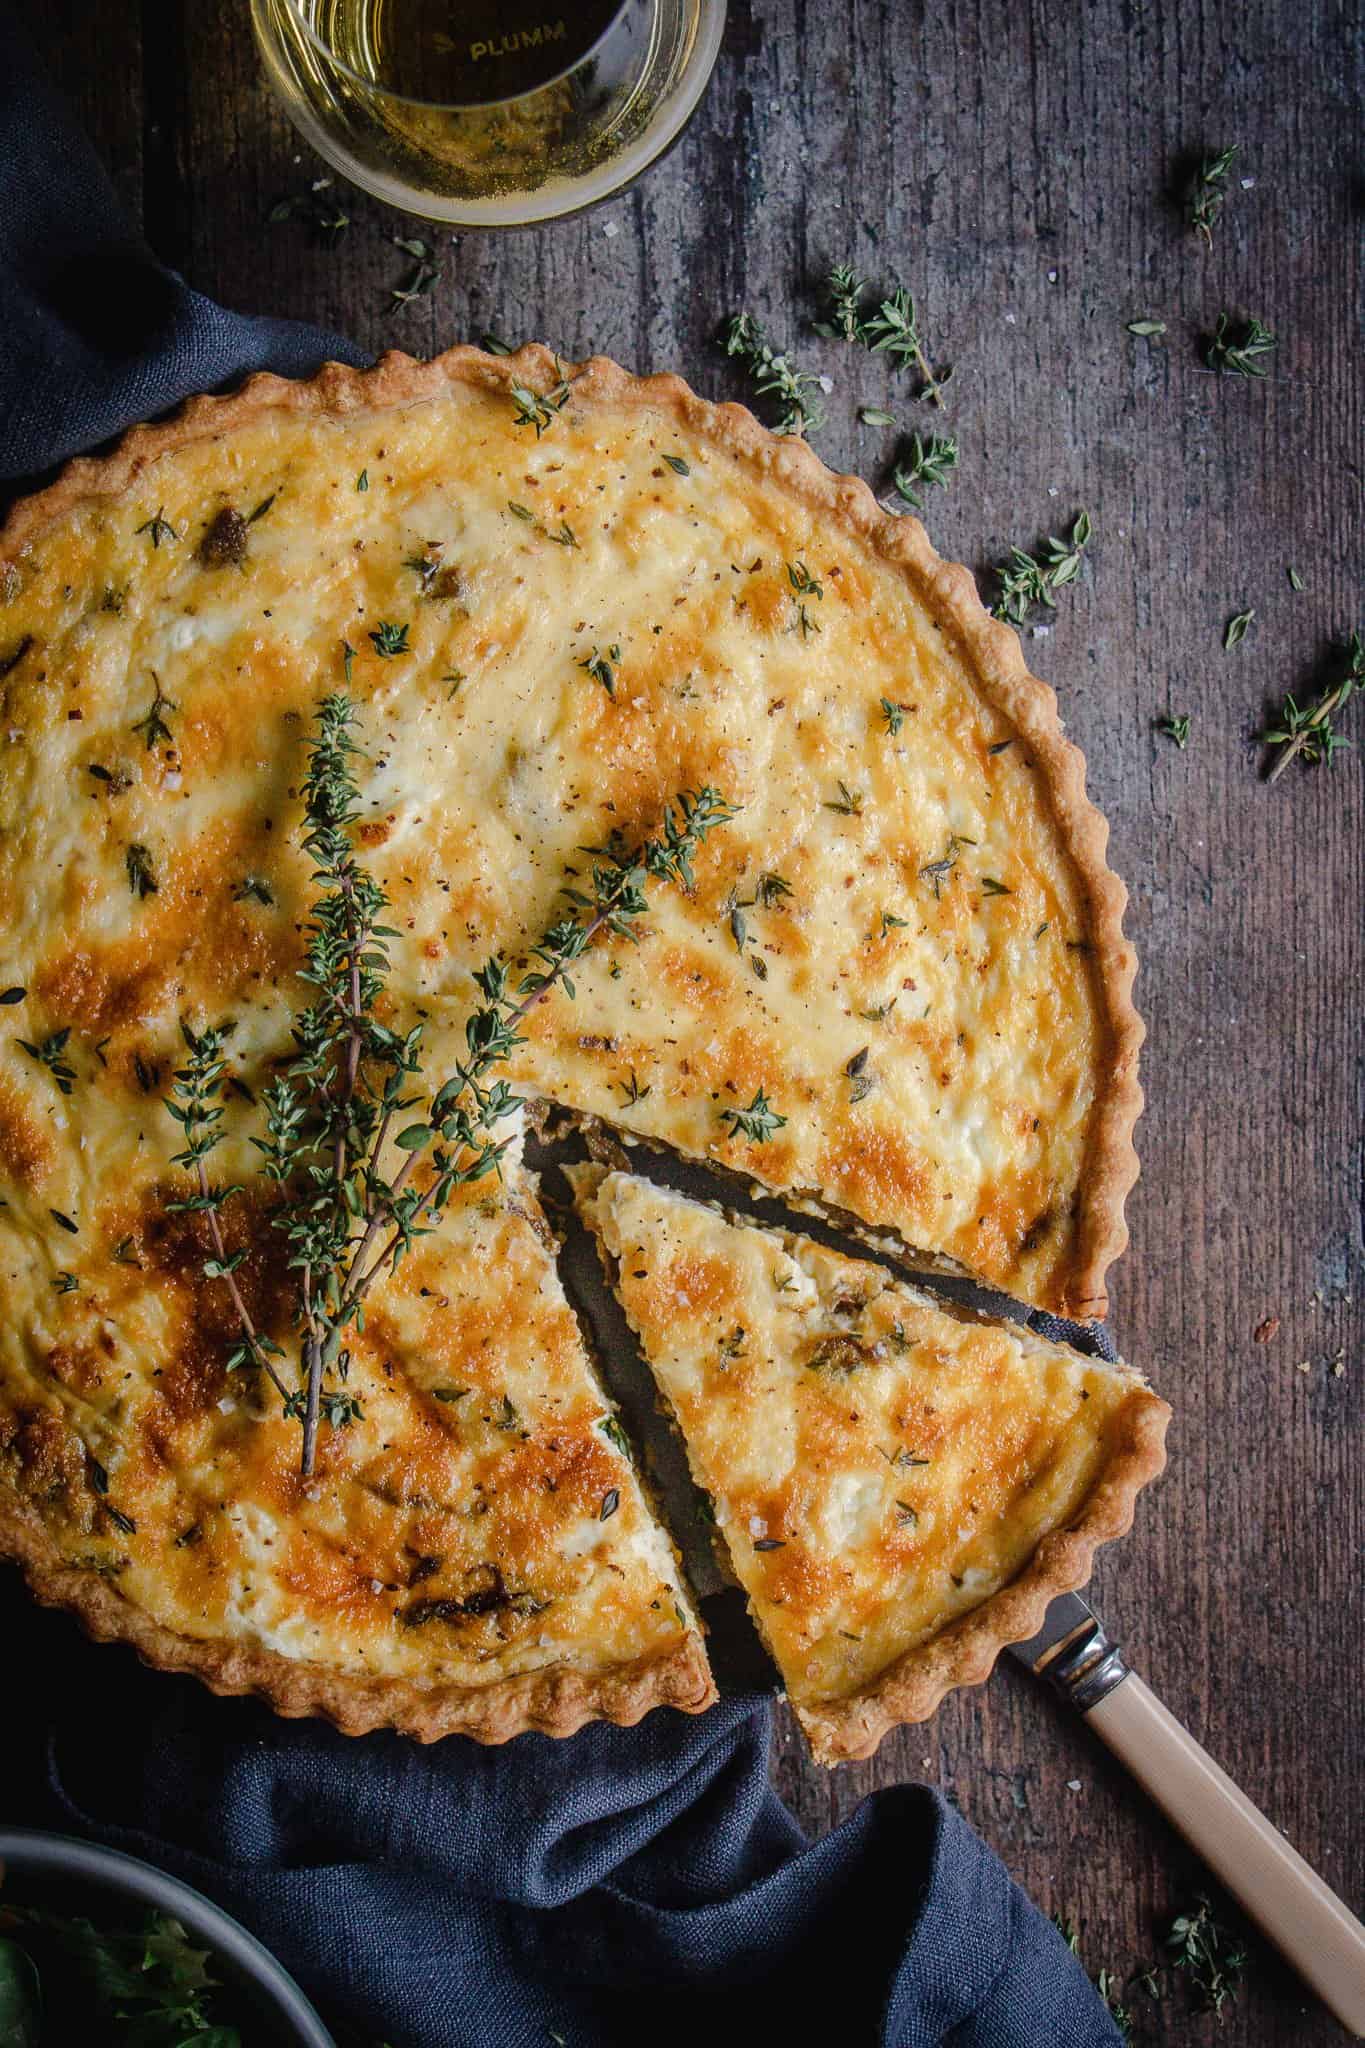 Caramelized onion and goats cheese tart